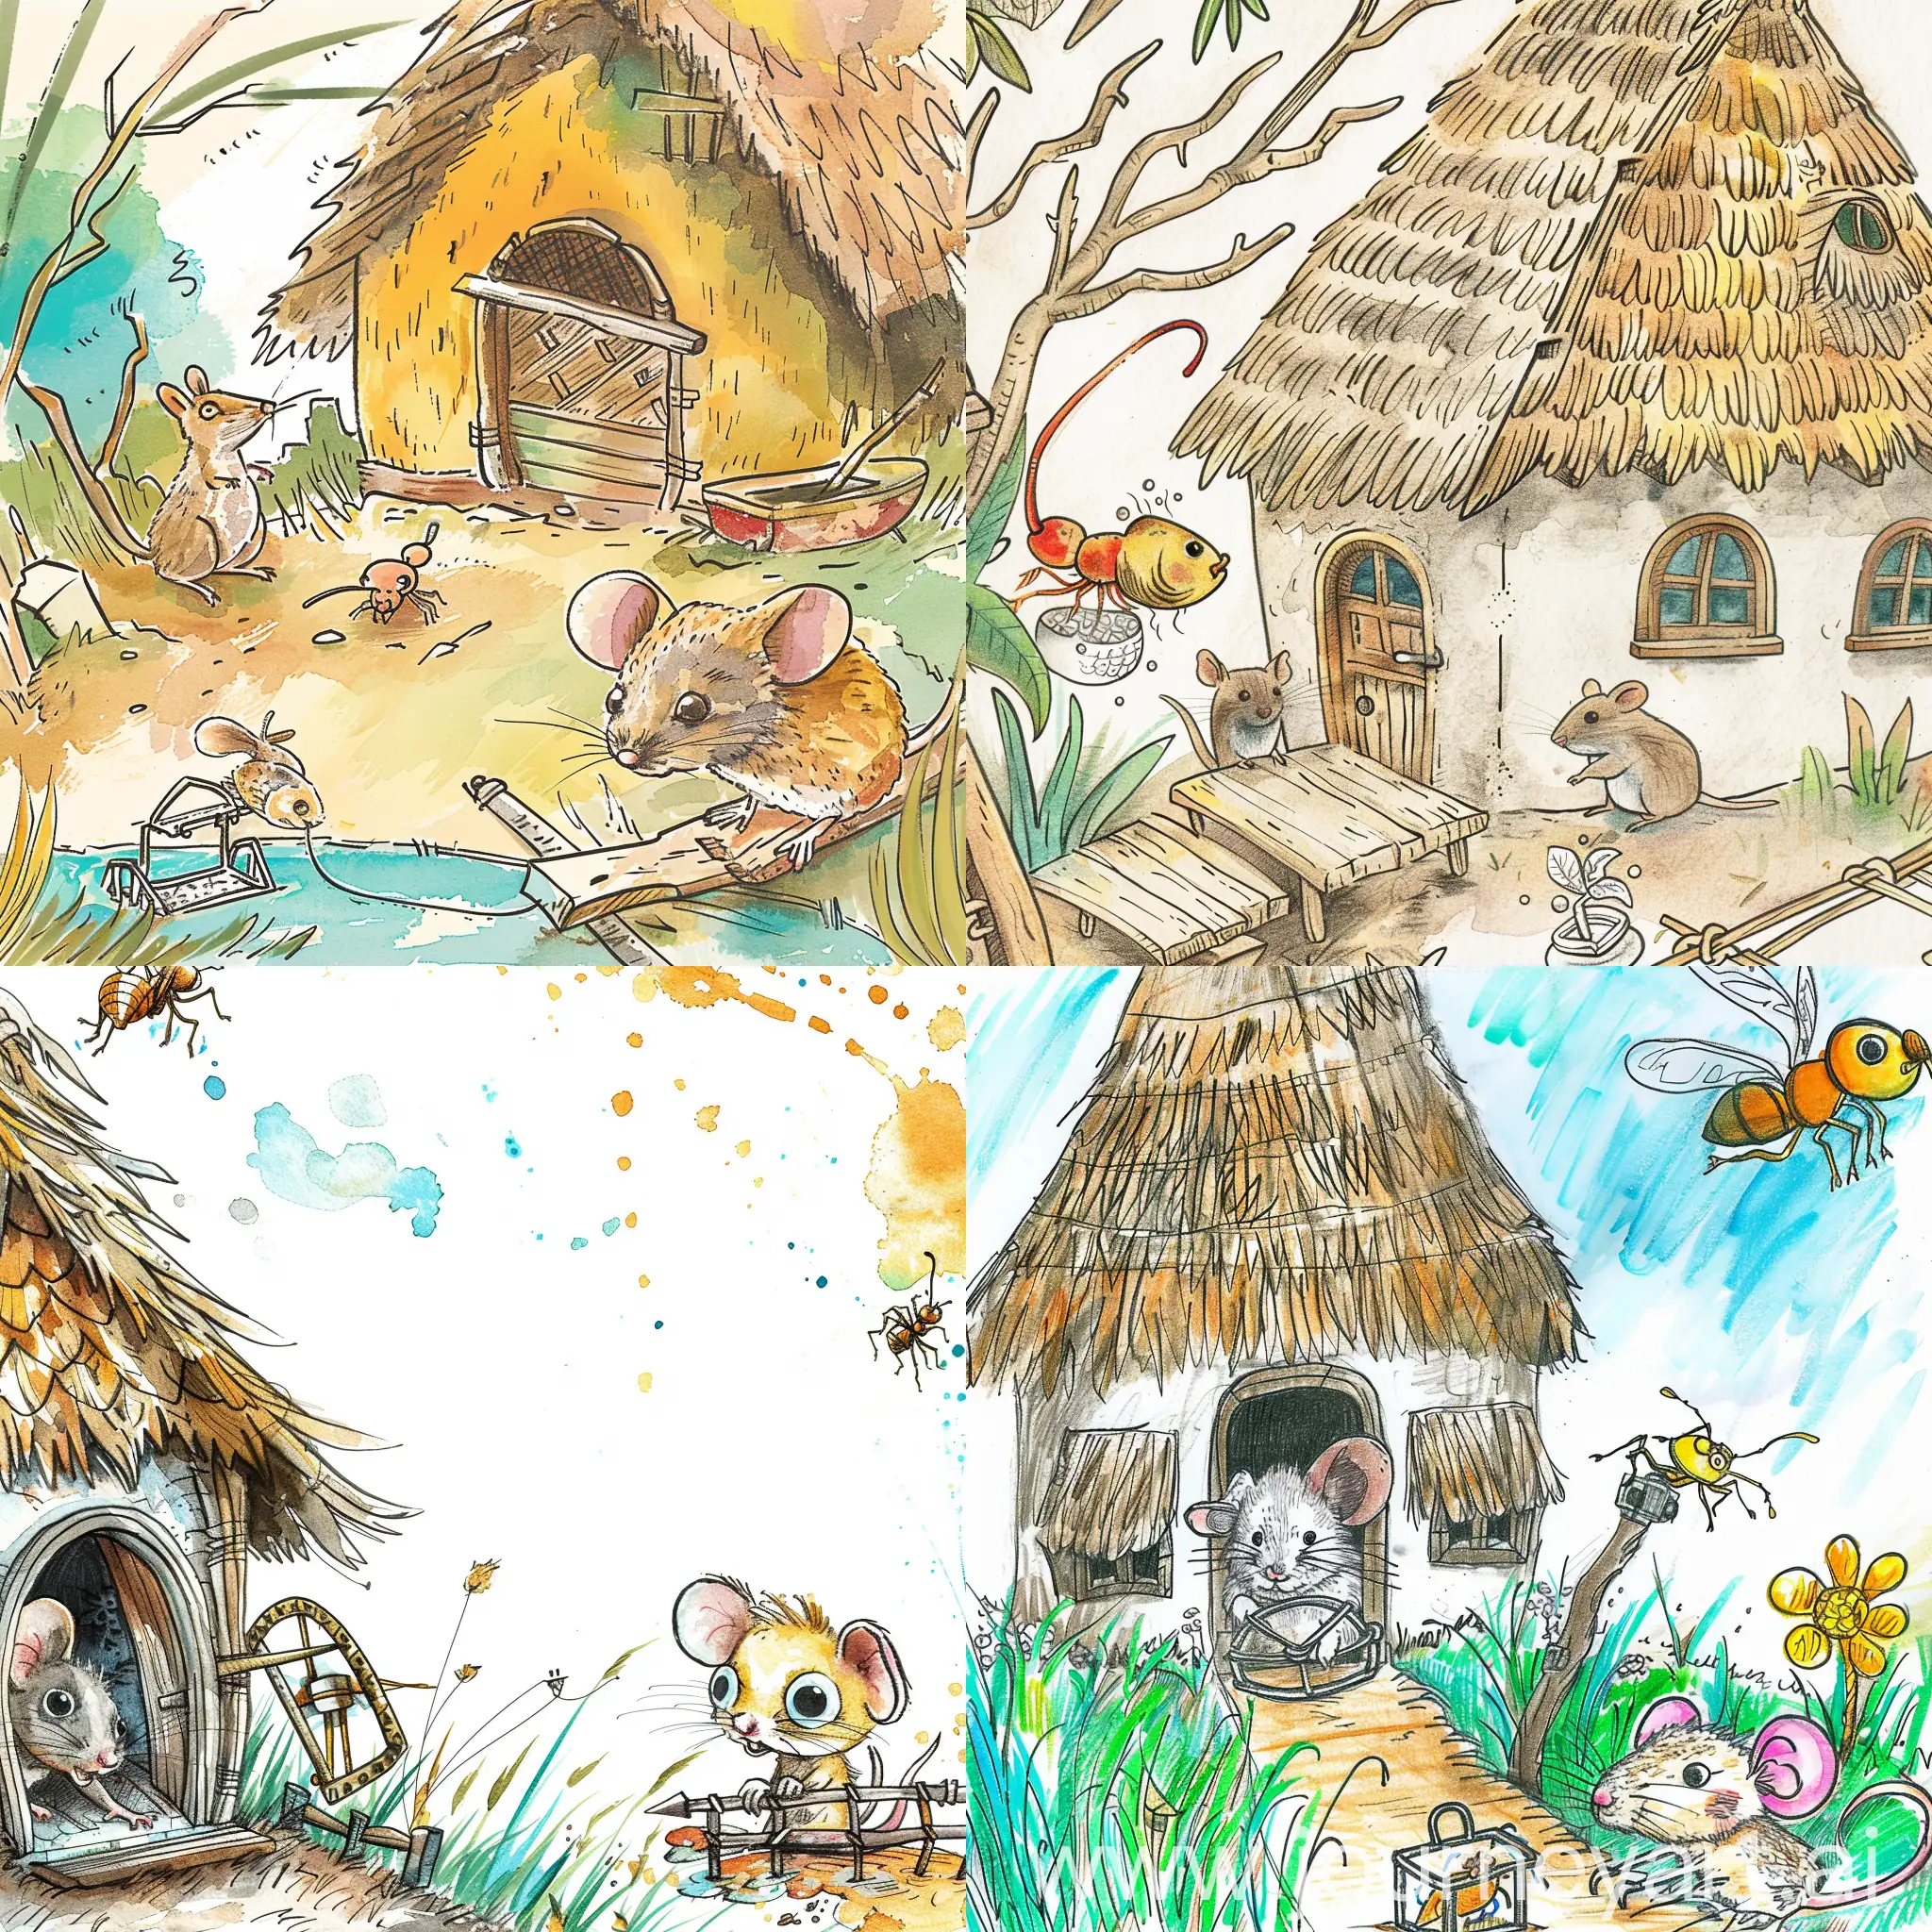 Inspired by fairy tales, this minimalist drawing sketch features a mouse (in focus), a thatched house, ((fish in a mousetrap and a trapped mouse)) (zoomed in), a weasel nearby, a sneering ant, a bright and colourful background design, and whimsical characters to catch the eye and spark the imagination of young readers. Simple, Illustration, Watercolour, Rough, Cute, Webtoon Style